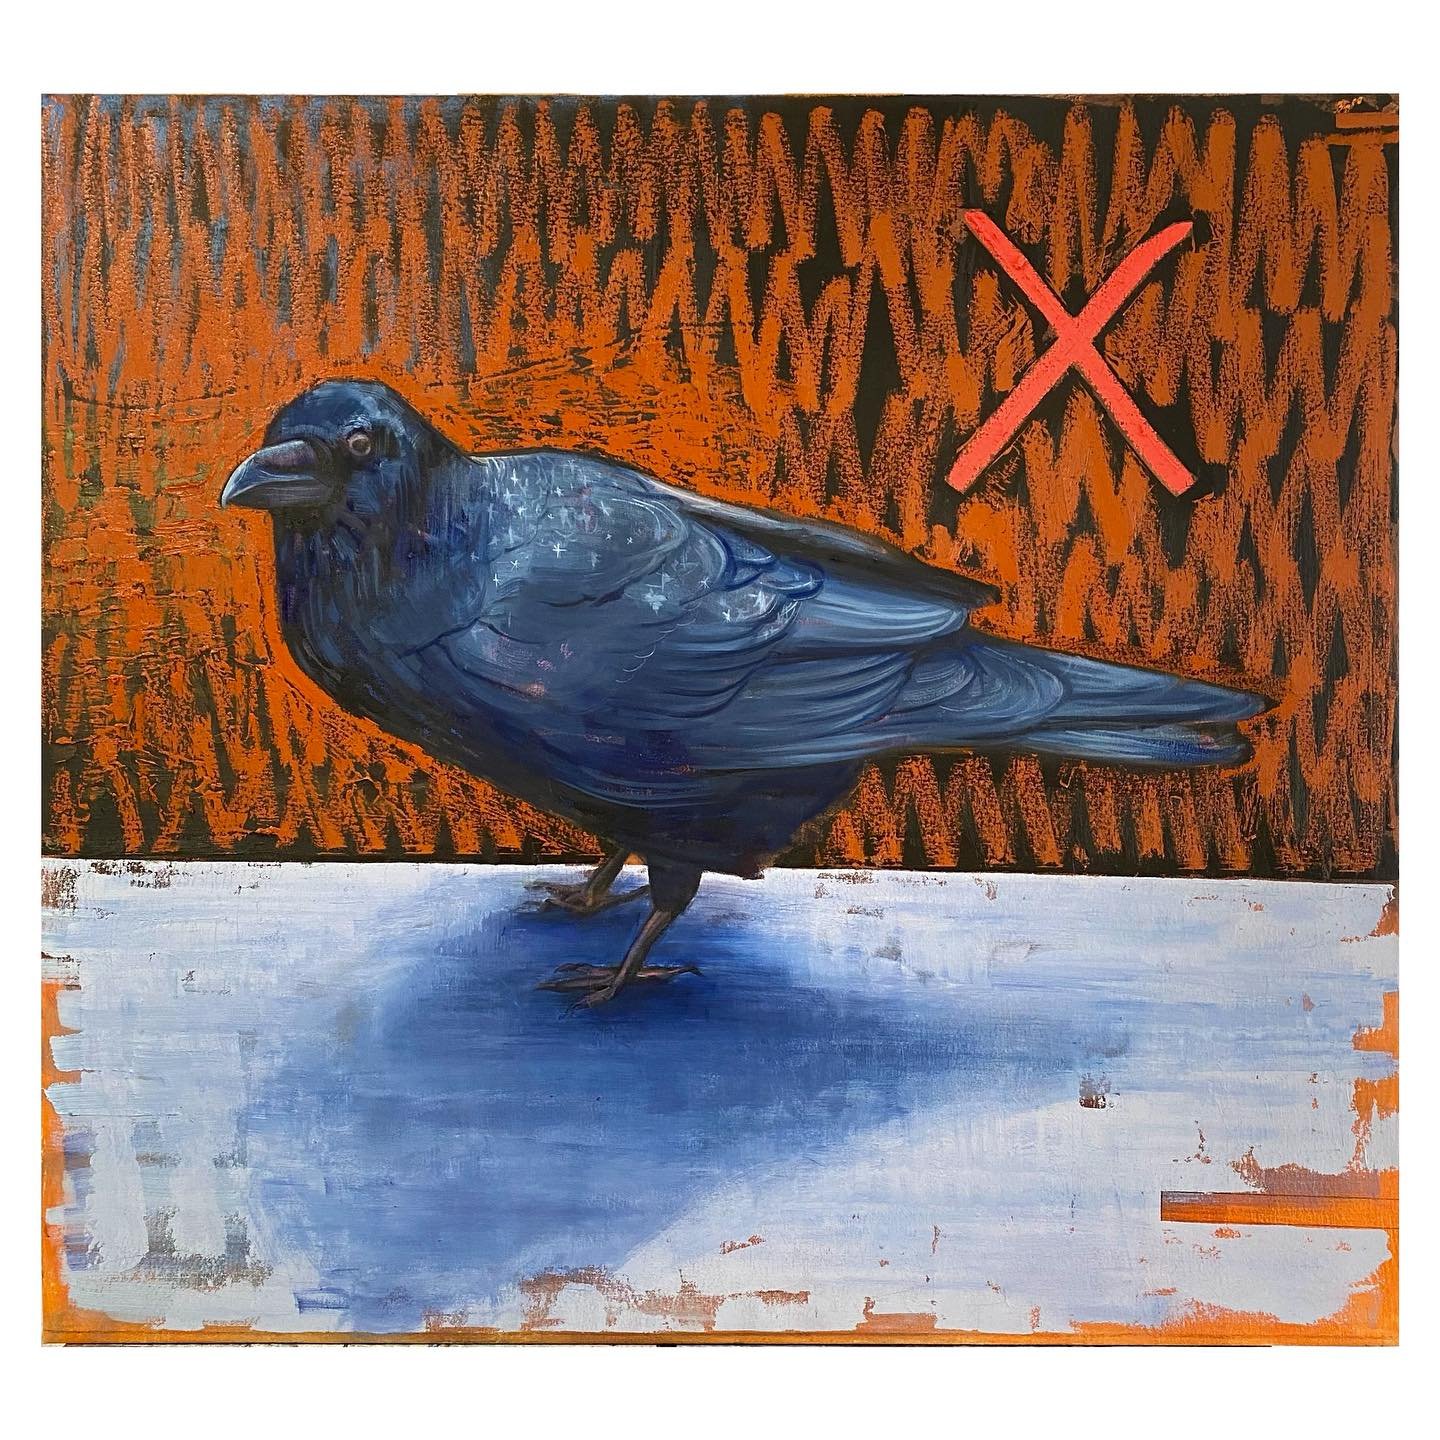 My first finished painting in the new studio &ldquo;Raven on Time&rdquo; &bull; 36&rdquo;x33&rdquo;&bull; oil on canvas &bull; One of the major differences that struck me about being in the southwest versus New England is all the ravens. They are hug